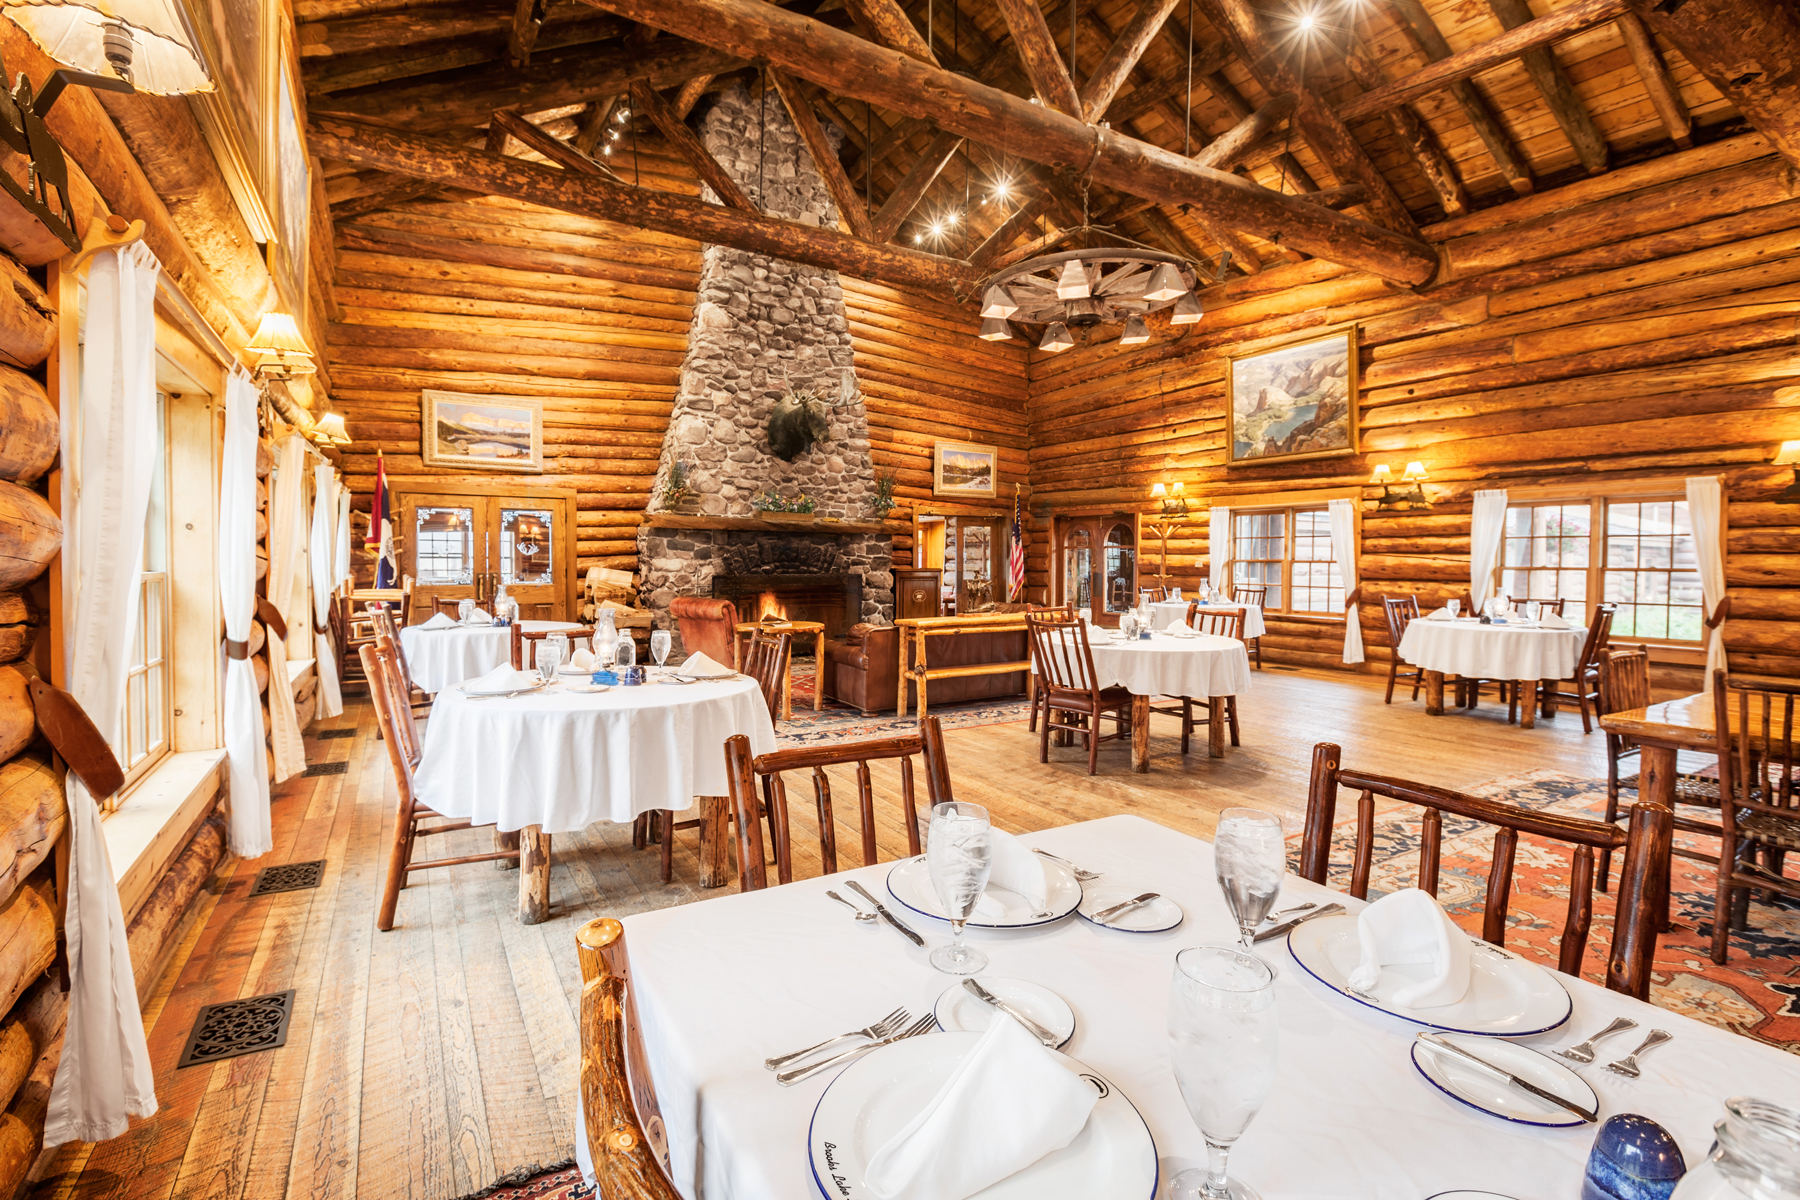 Brooks Lake Lodge’s culinary team offers guests three thoughtfully prepared Western gourmet meals each day, included in the overnight rate and served in the beautiful and spacious Great Hall.